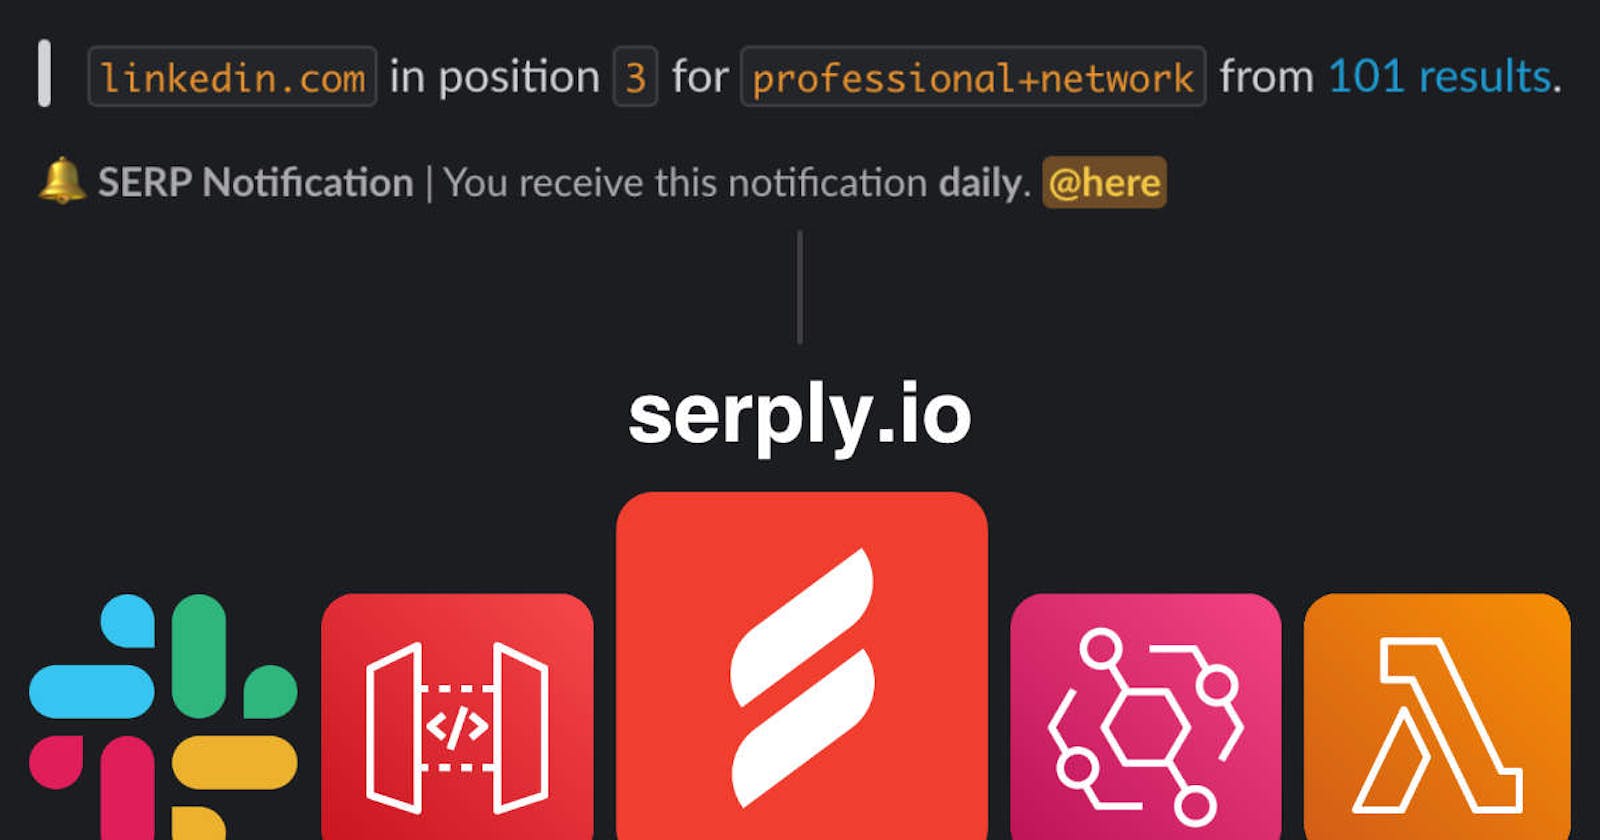 Serply Notifications Part 1: Search Engine Result Pages (SERP)